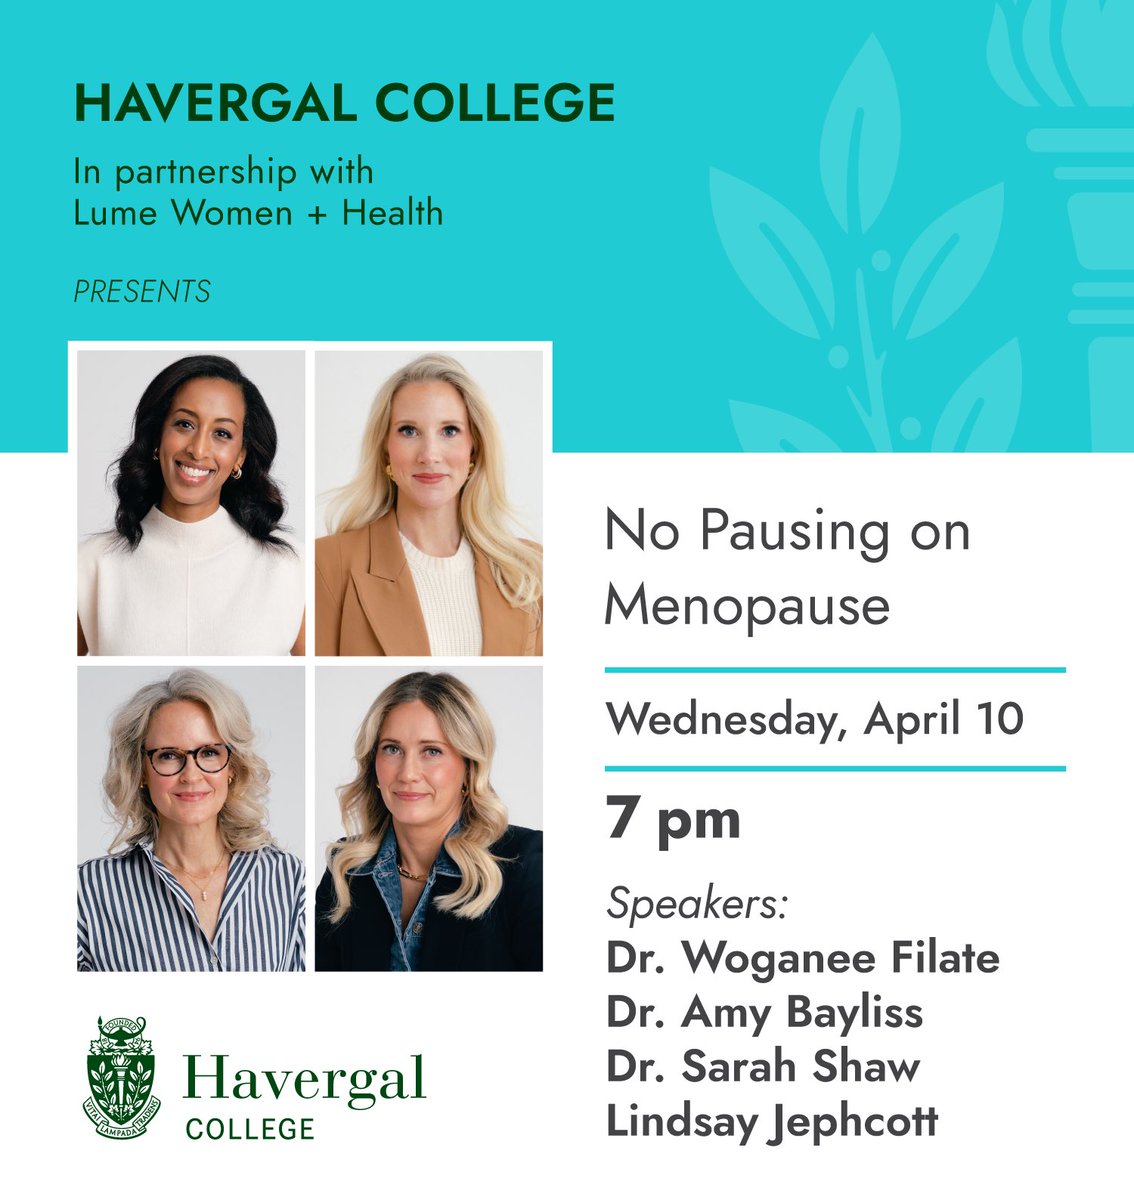 We welcome current & new parents, faculty & staff to a panel discussion next week on women’s health for 40+. No Pausing on Menopause will focus on perimenopause & menopause symptom management, sexual health, disease prevention & debunking myths. Register: bit.ly/4agAZZs